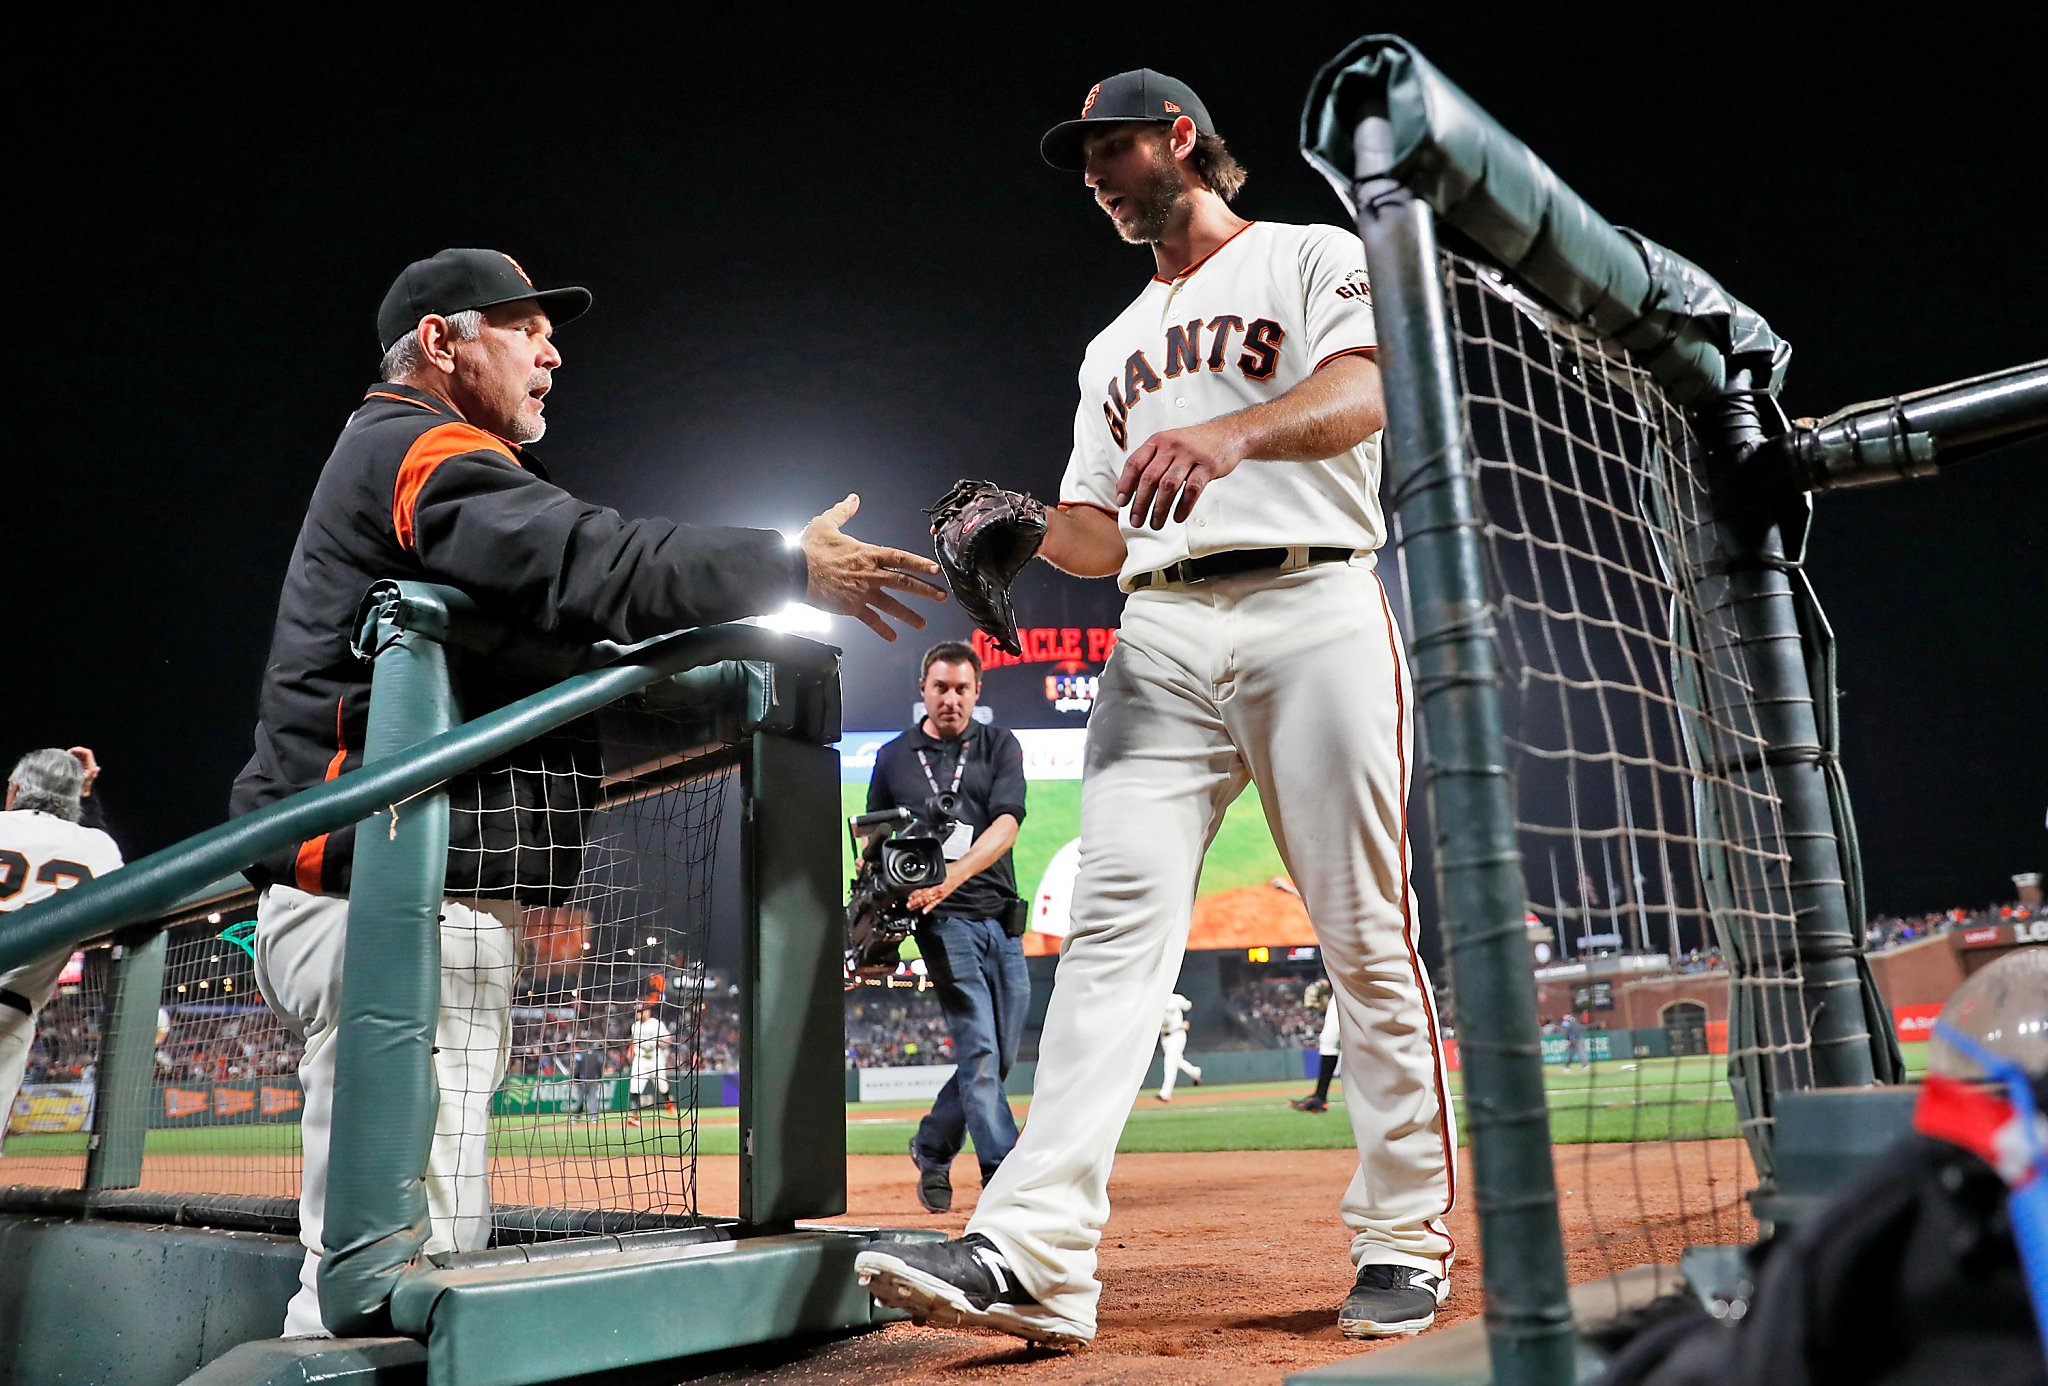 SF Giants ace Madison Bumgarner named AP Male Athlete of the Year